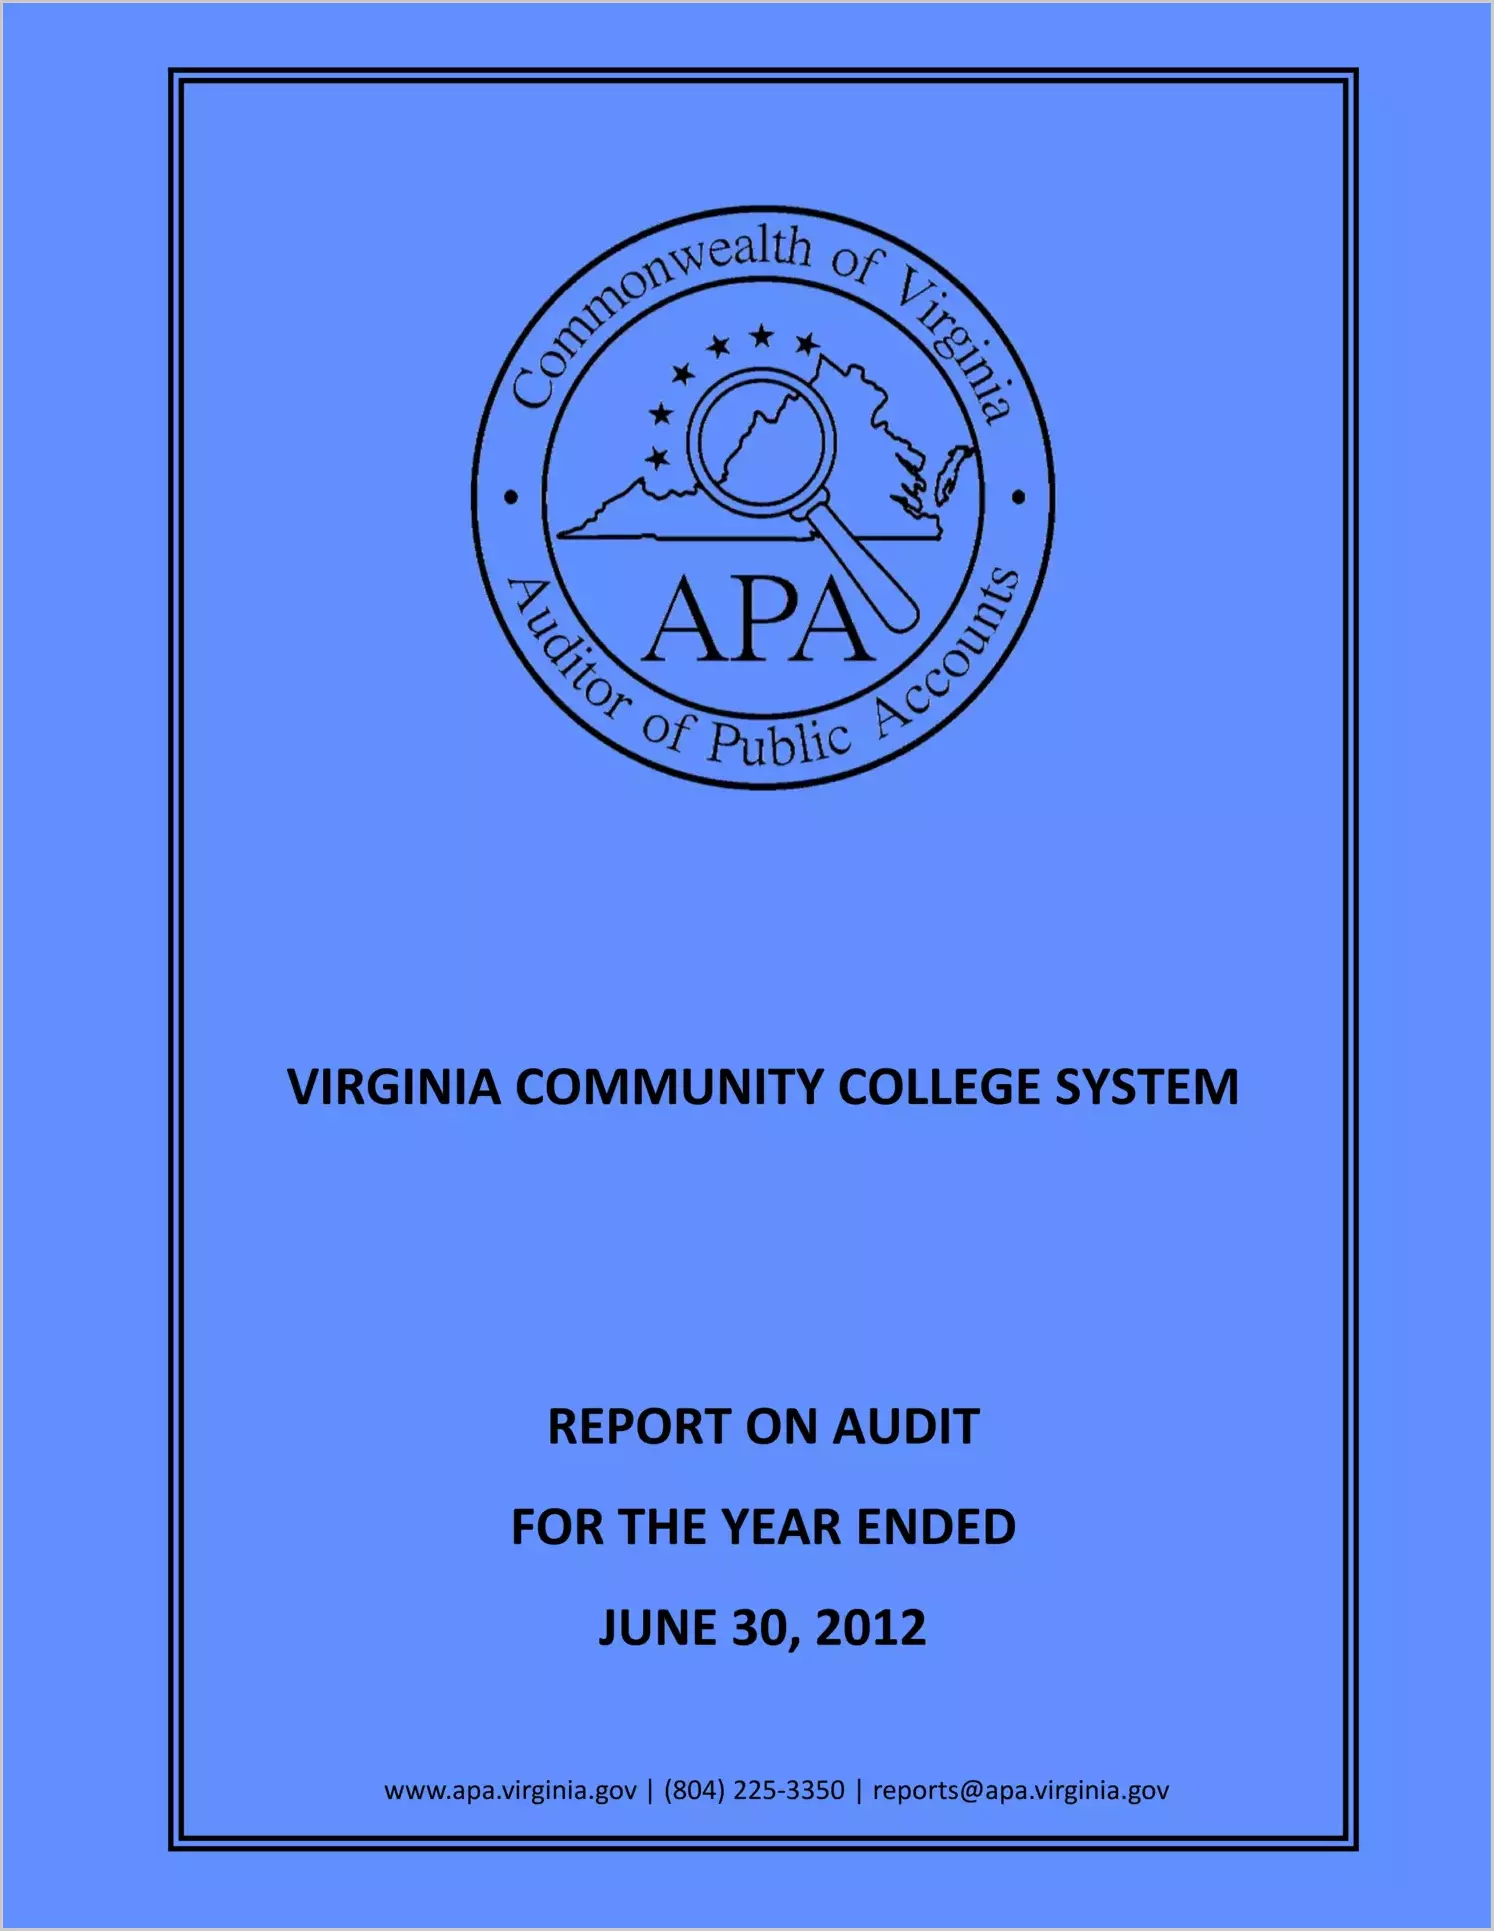 Virginia Community College System for the year ended June 30, 2012